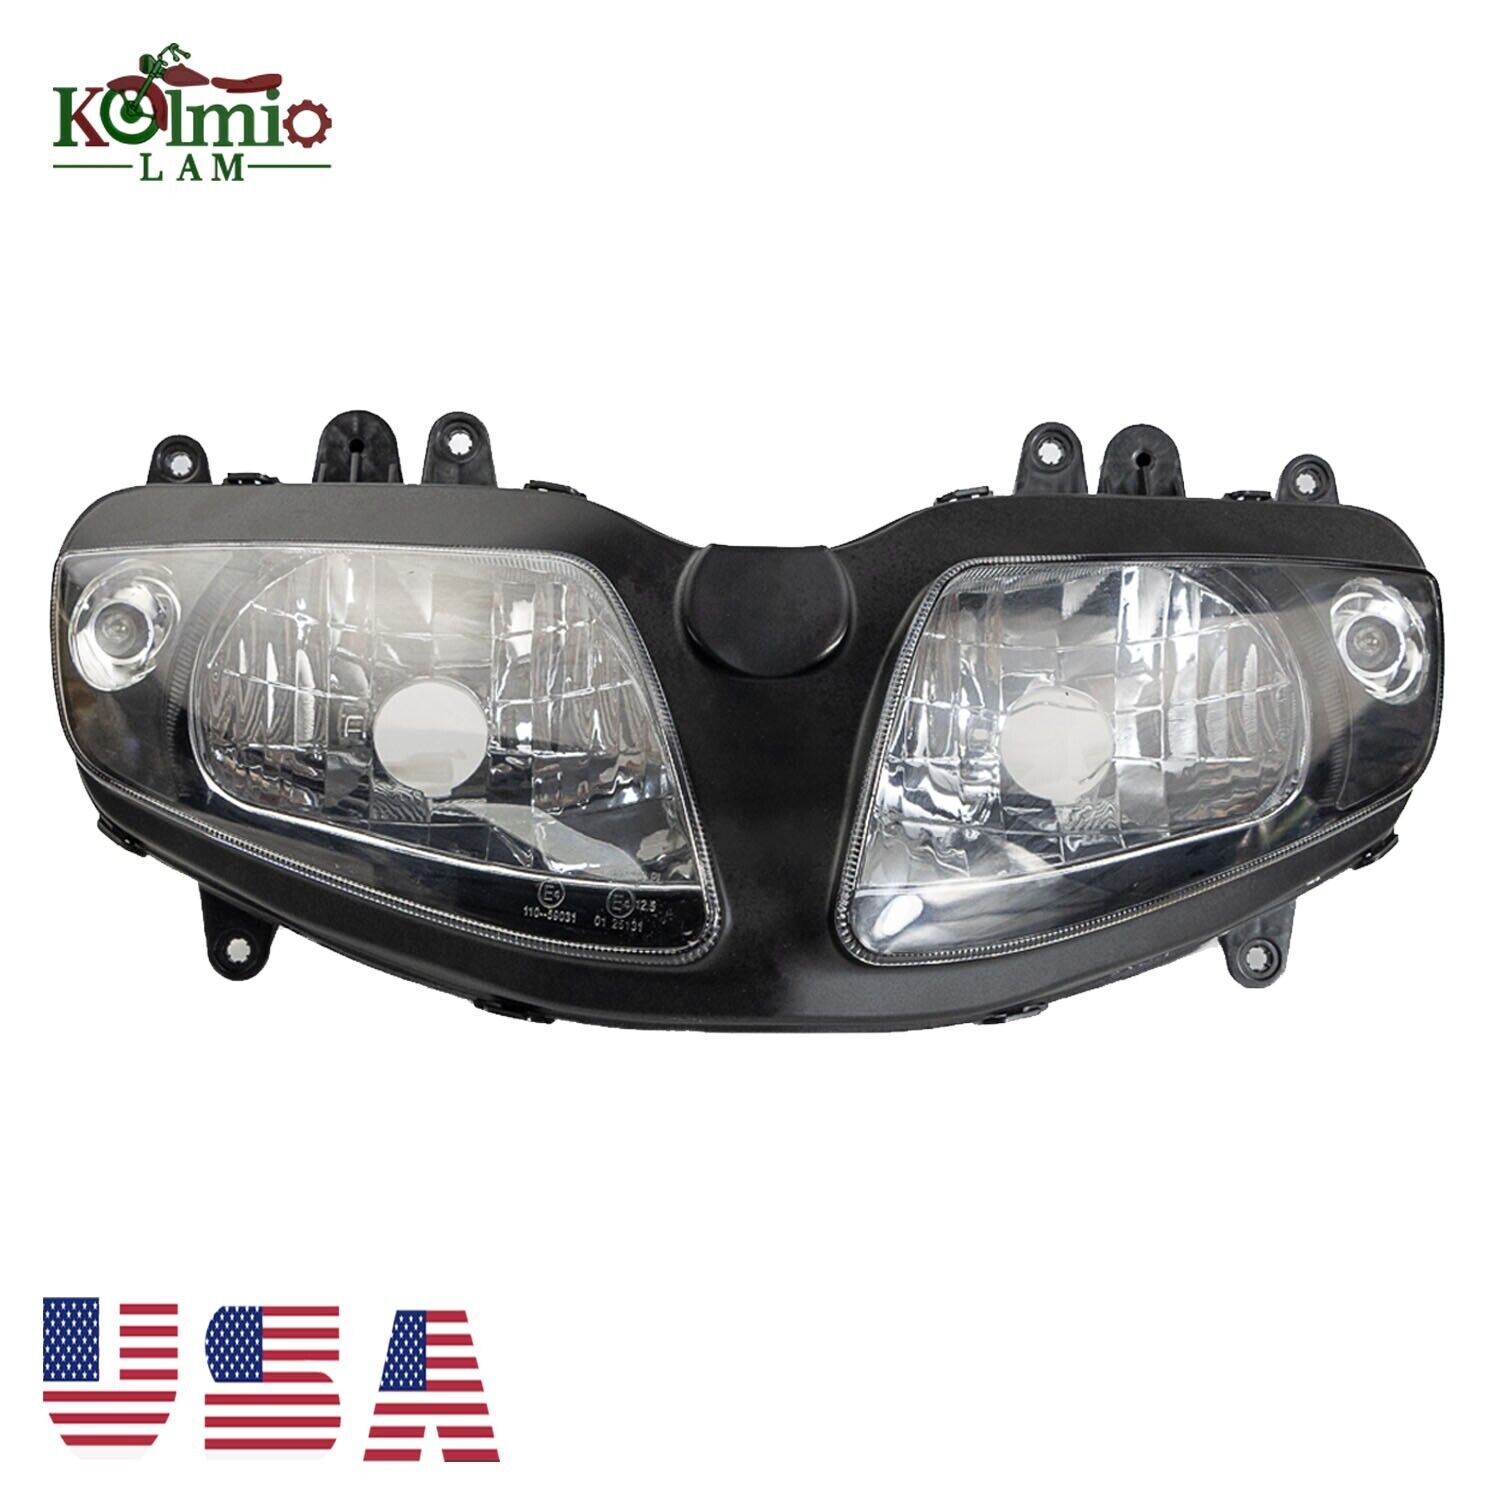 Fit For SUZUKI SV650 SV1000S 2003-2011 Front Headlight Assembly Headlamp